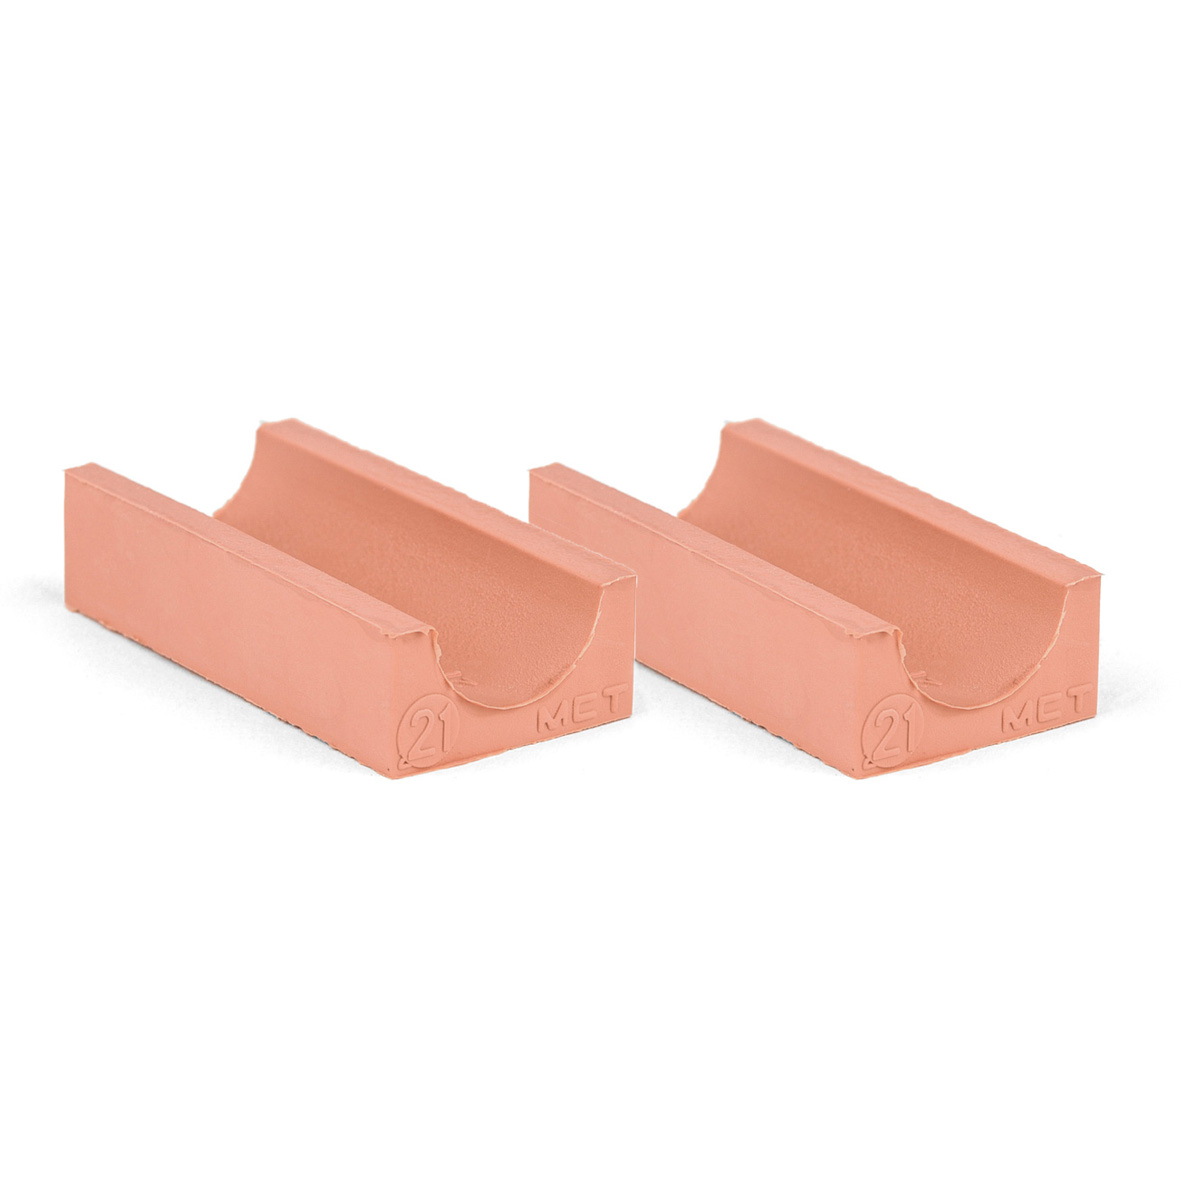 30-21*2 Set of 2 half insert block lycron, 30-21 for cable/pipe diam. 20.5-21.5mm